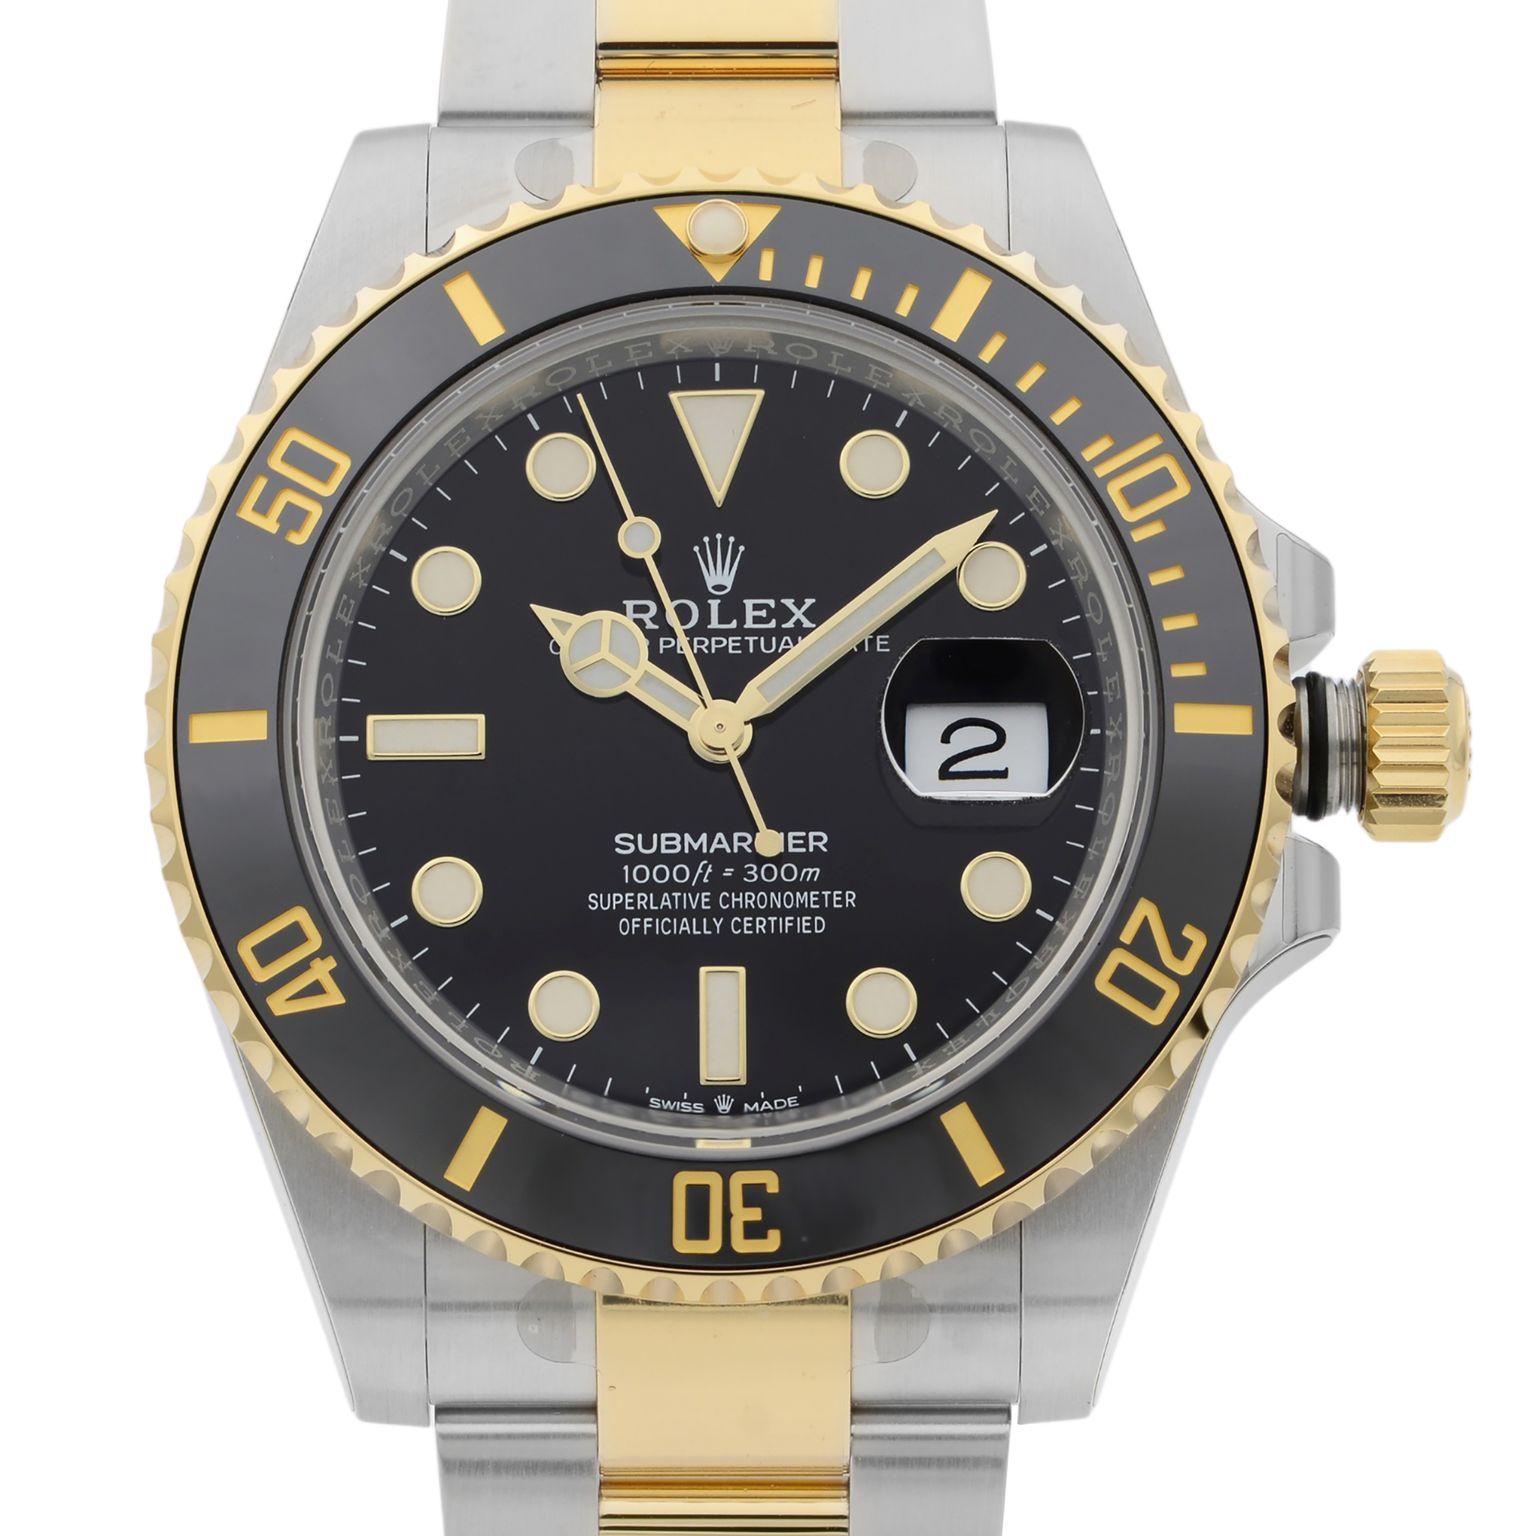 This brand new Rolex Submariner 126613LN is a beautiful men's timepiece that is powered by mechanical (automatic) movement which is cased in a stainless steel case. It has a round shape face, date indicator dial and has hand sticks & dots style